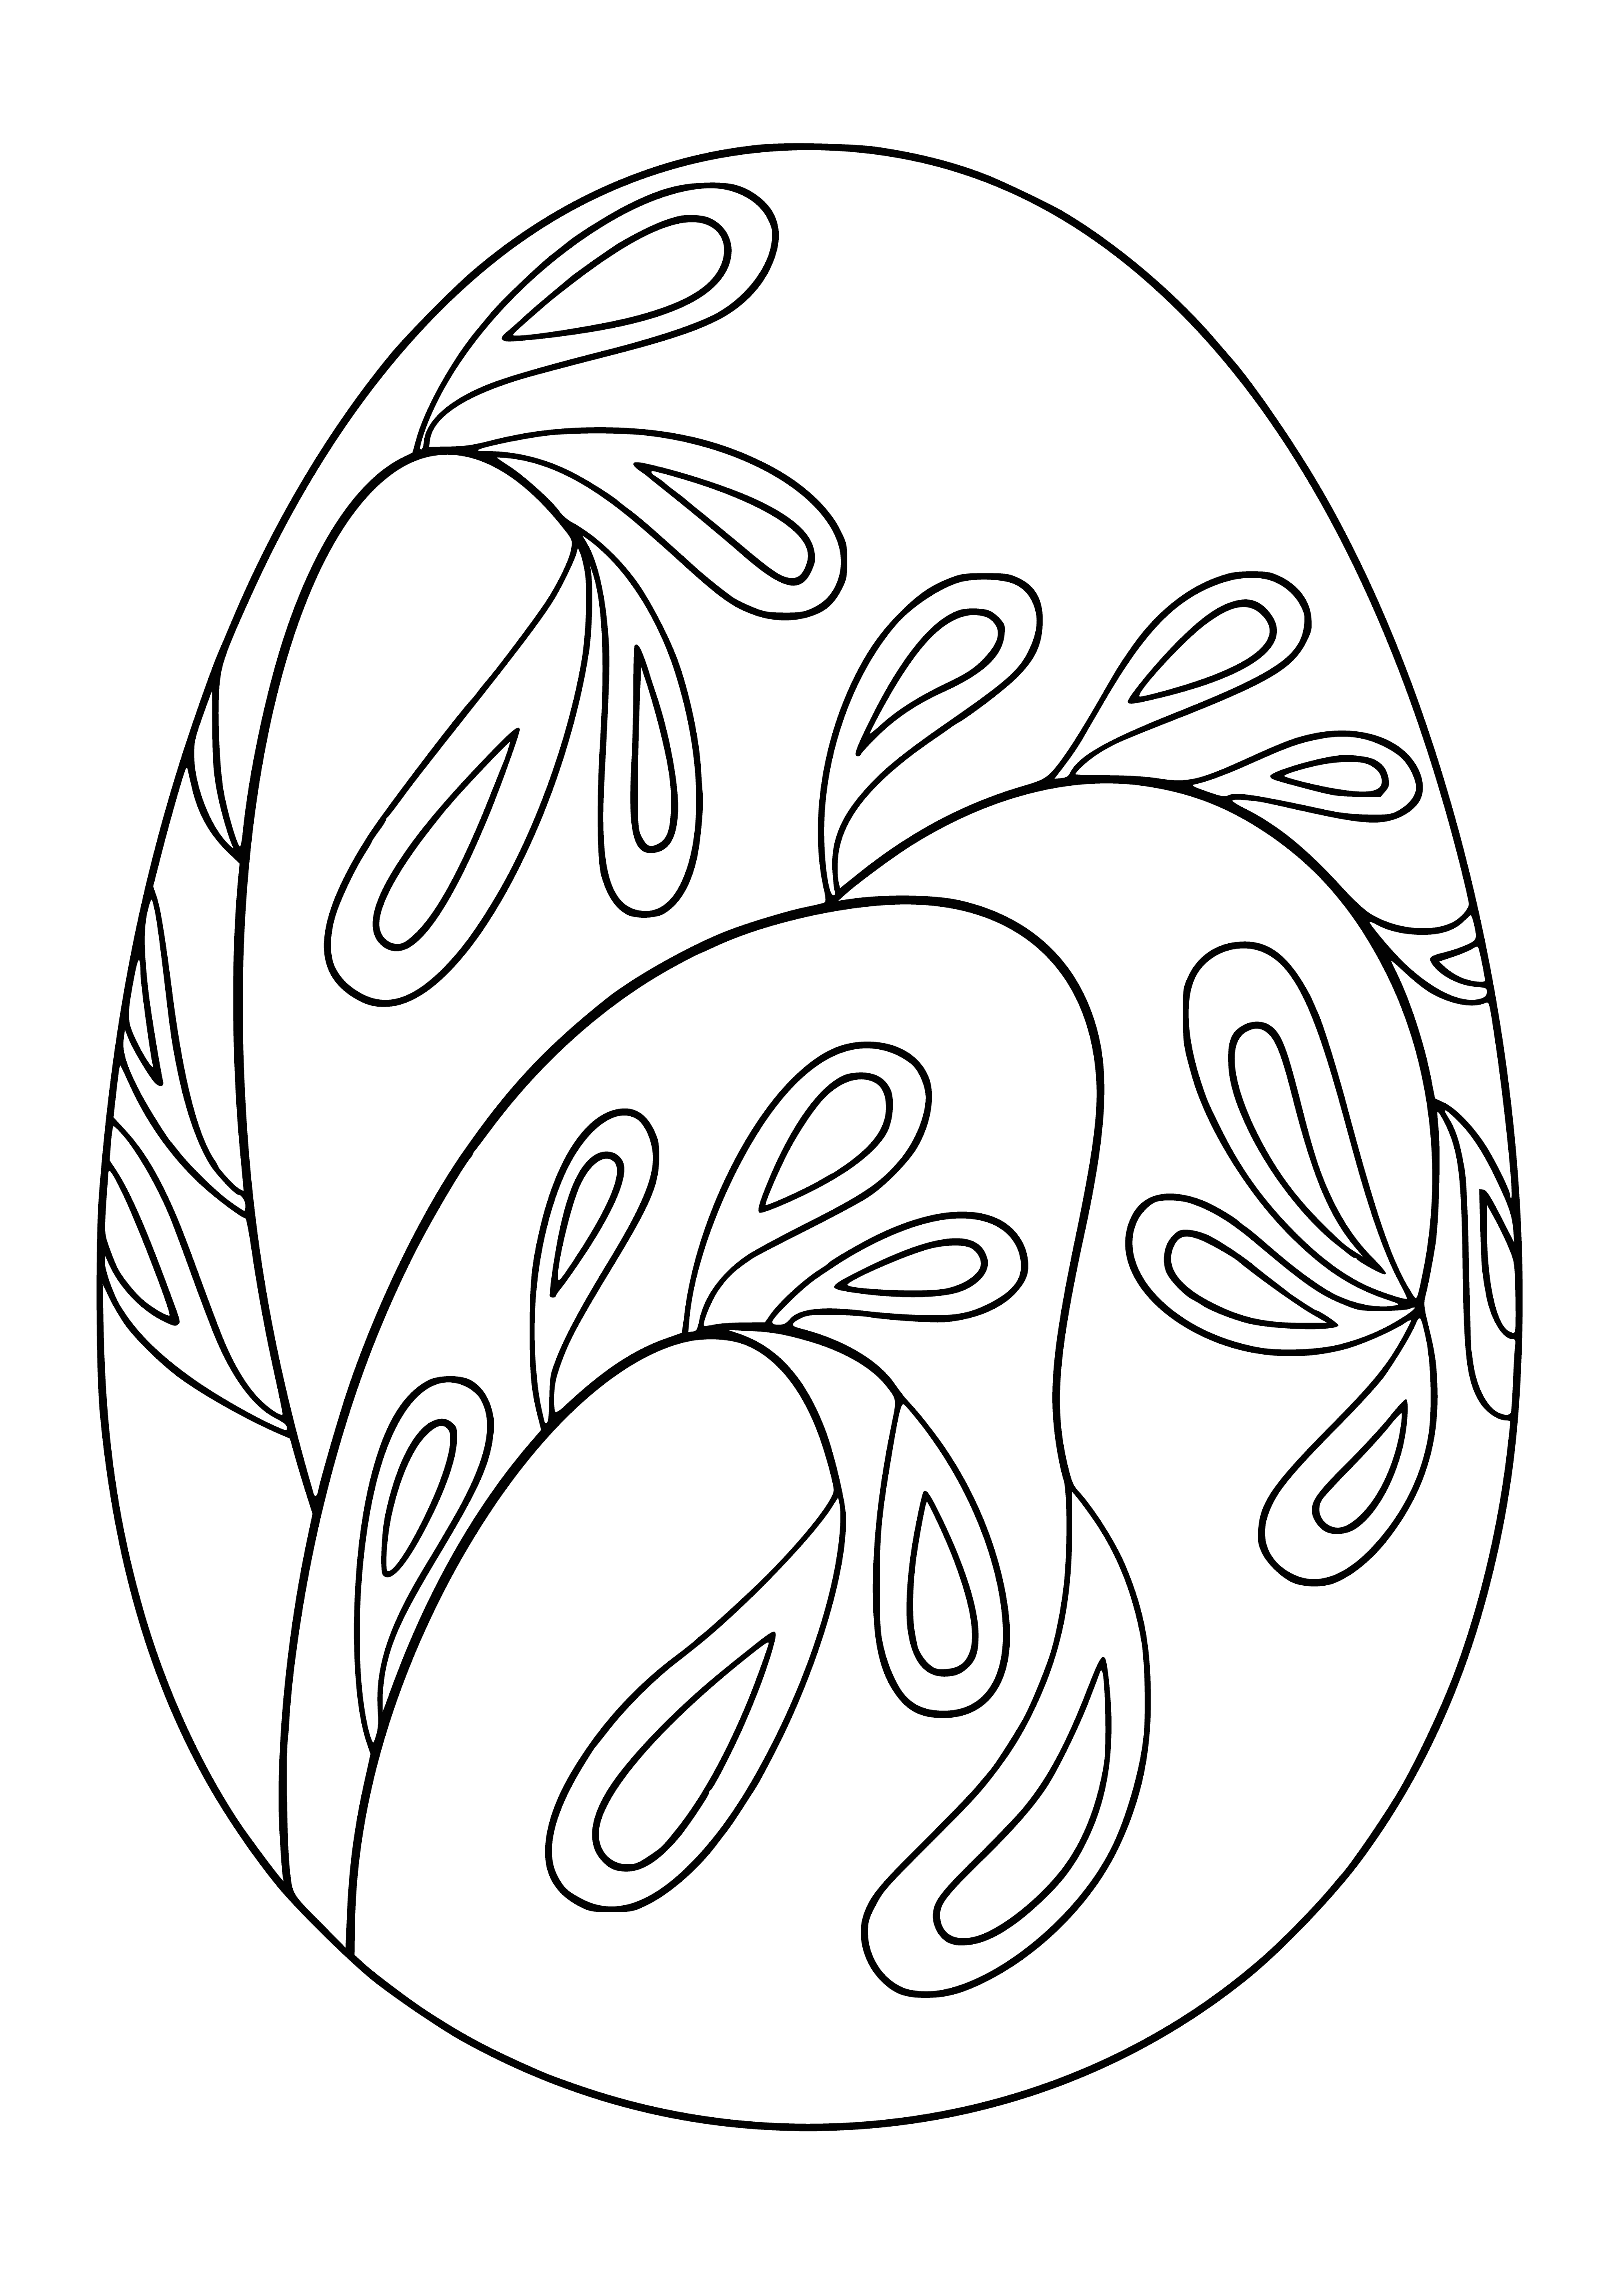 coloring page: Decorate Easter eggs with fun patterns & colors! Stripes, dots, flowers & more; pink, blue & yellow eggs! #EasteryEggs #EasterFun